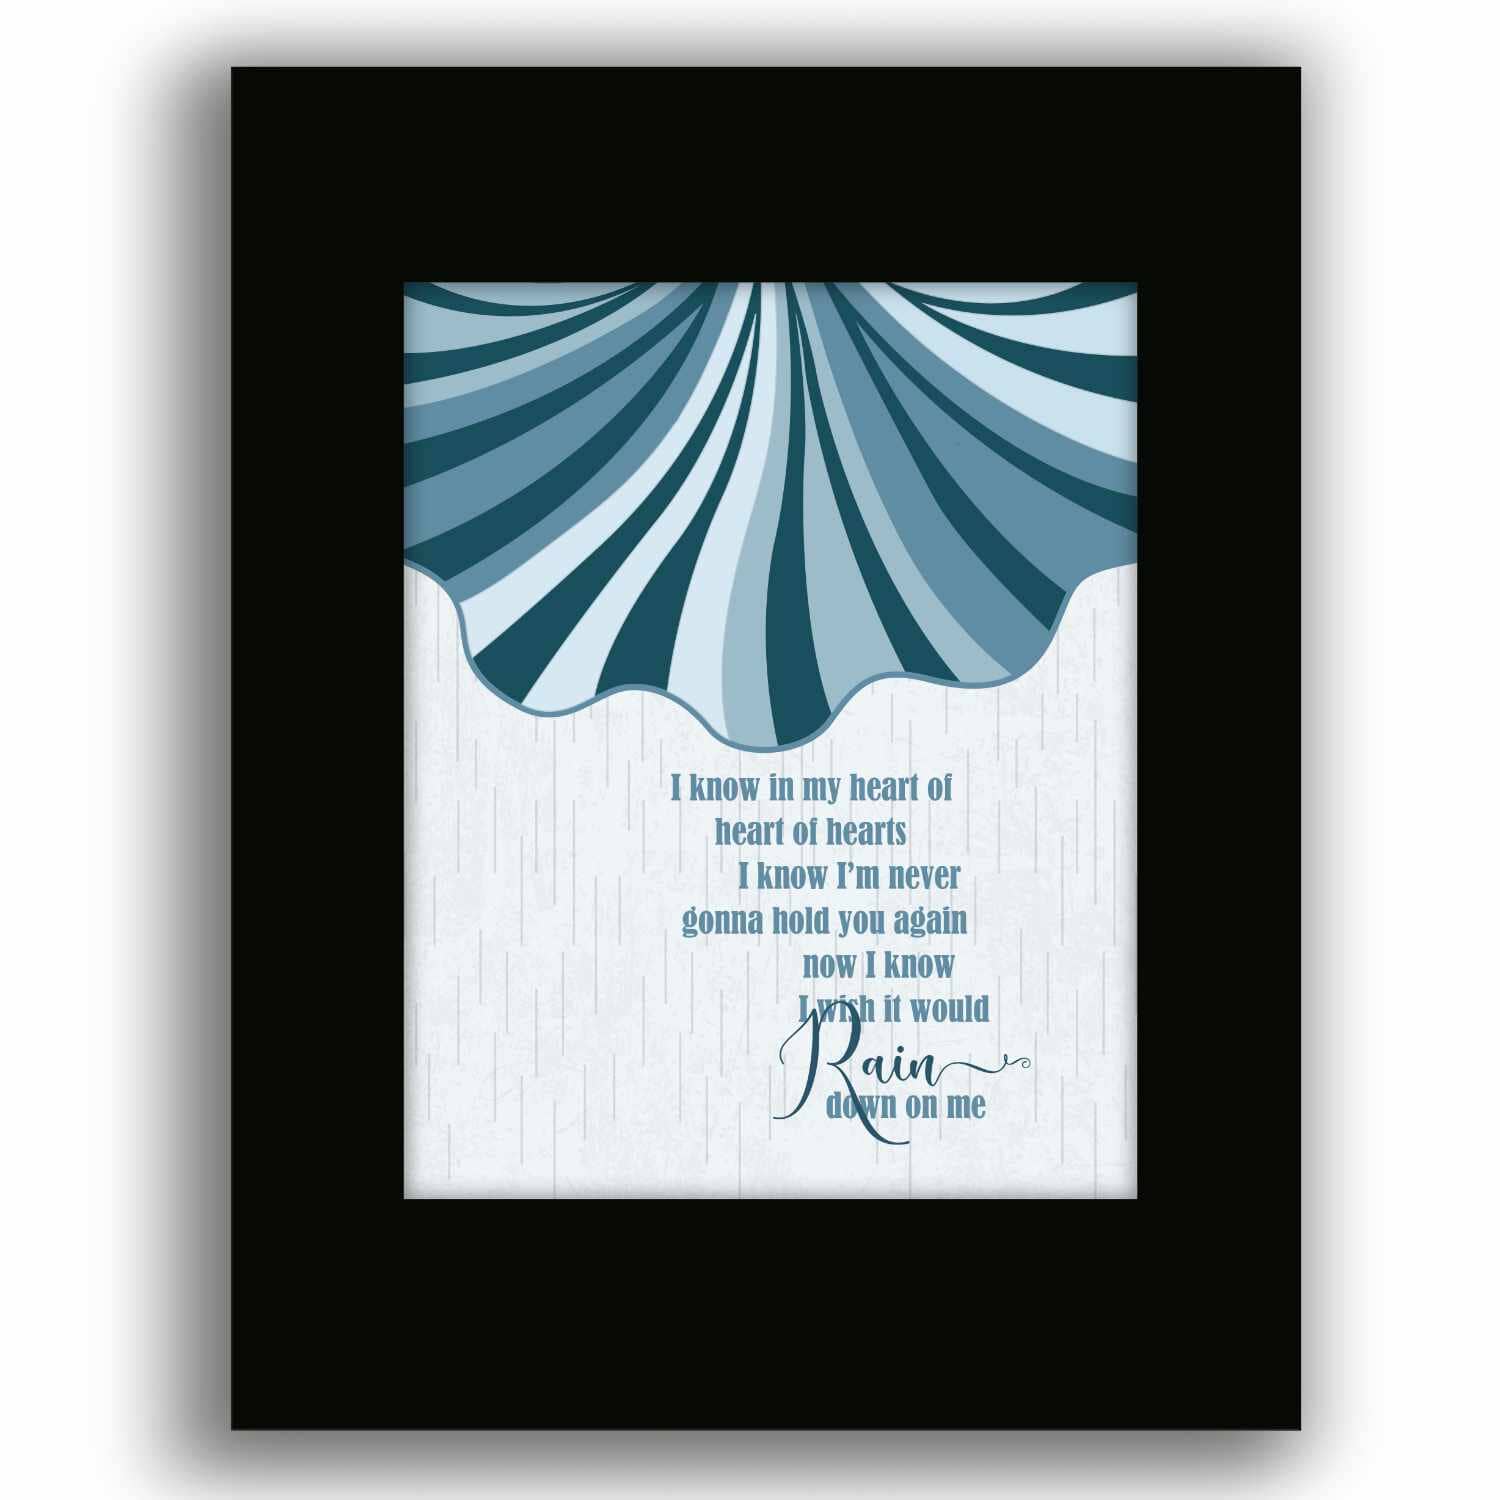 I Wish it Would Rain Down by Phil Collins - Song Lyric Poster Song Lyrics Art Song Lyrics Art 8x10 Black Matted Print 